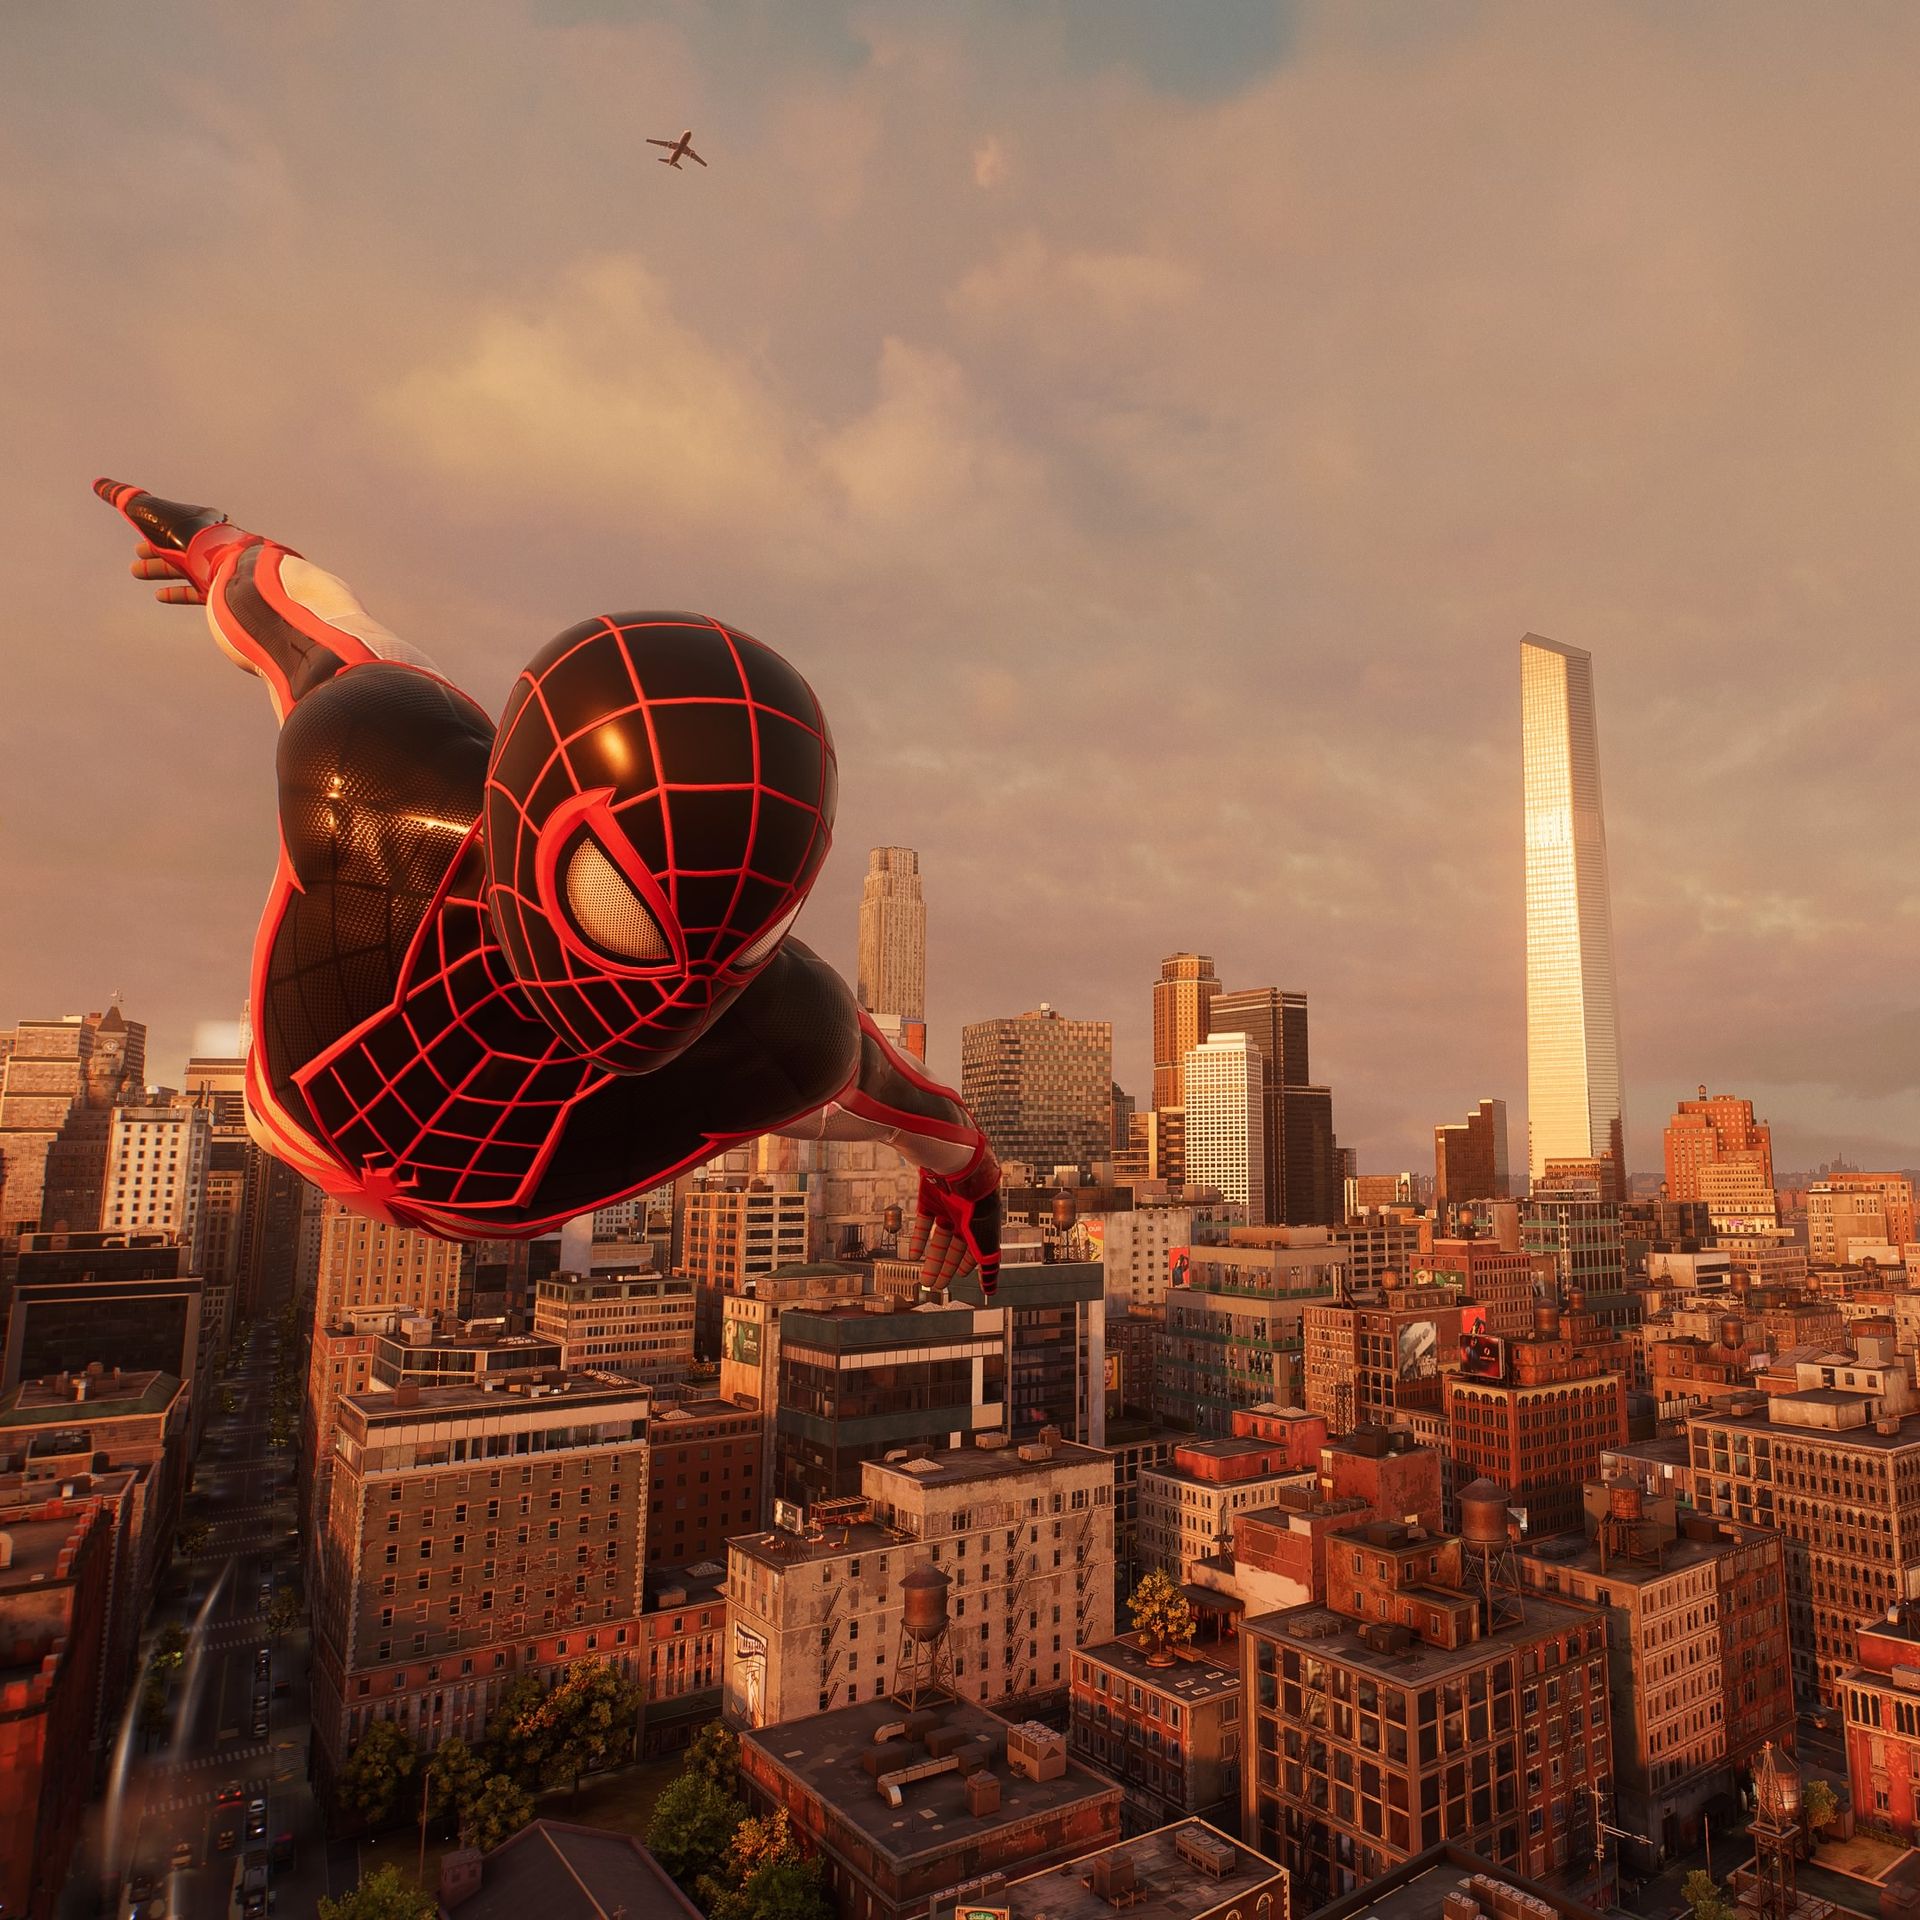 Spider-Man 2 Review: Even Heroes Need Help Sometimes